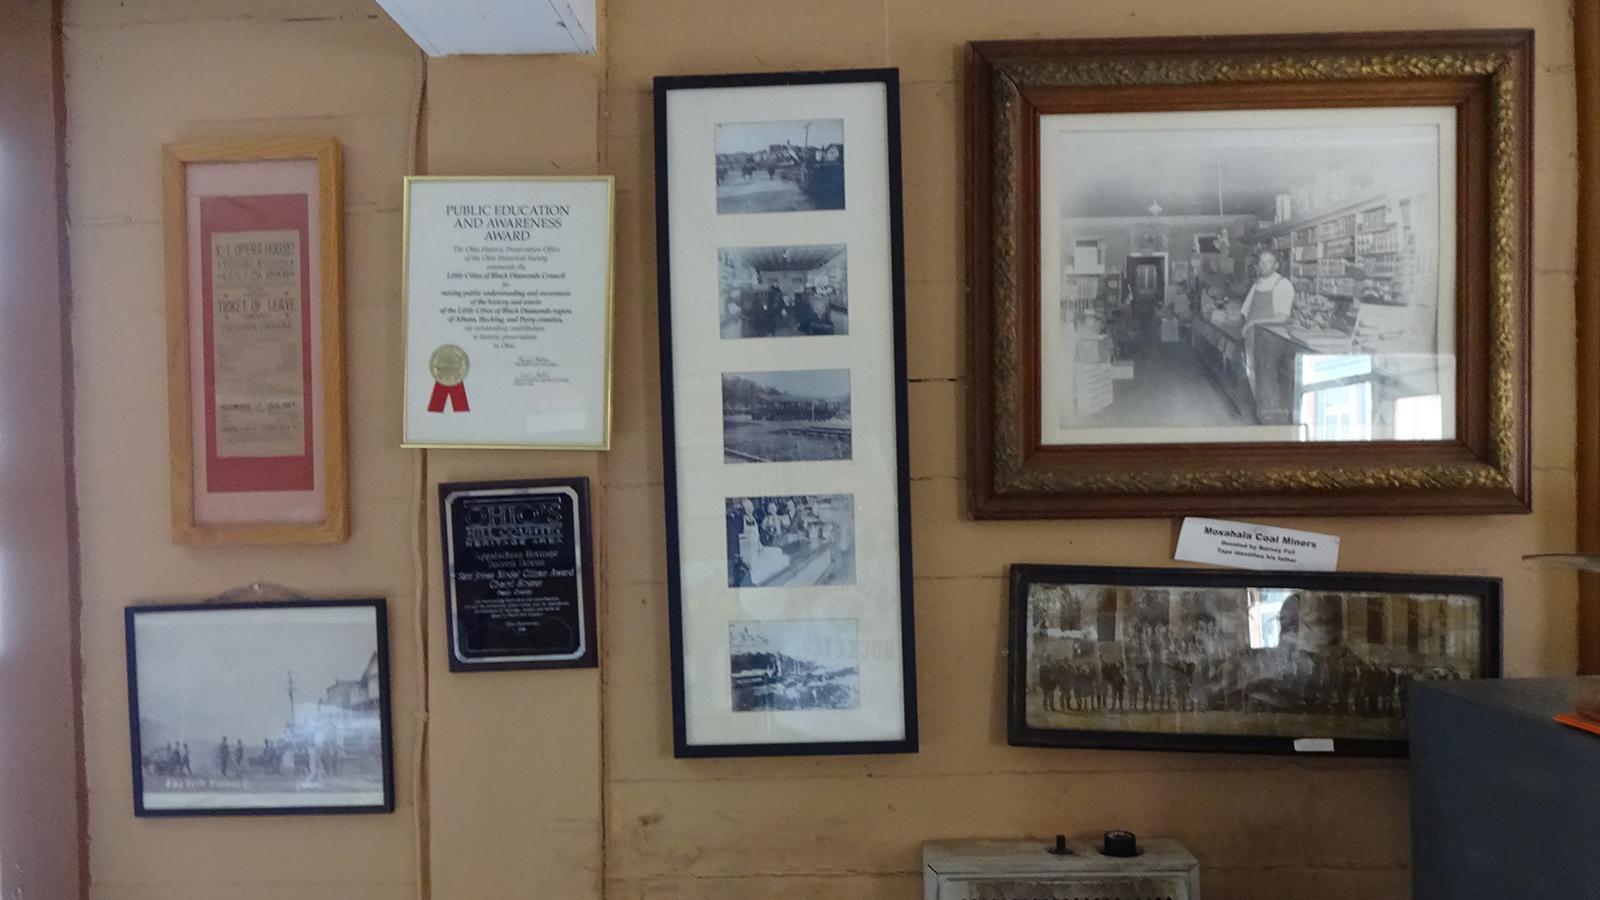 Photos and awards displayed on the wall of the Little Cities of Black Diamonds Council Office